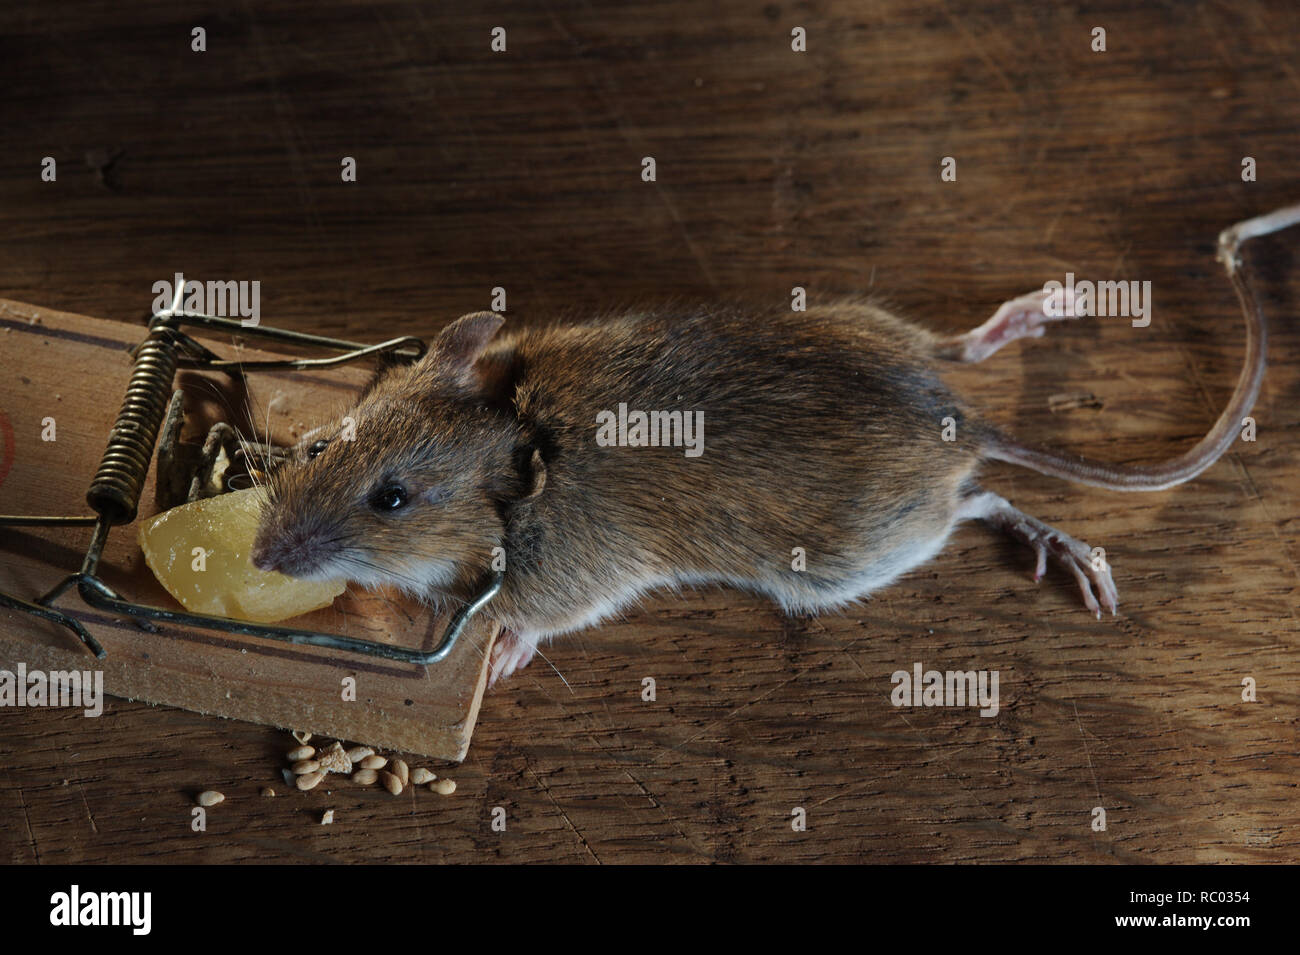 Maus in der Mausefalle gefangen | mouse caught in a mouse trap Stock Photo